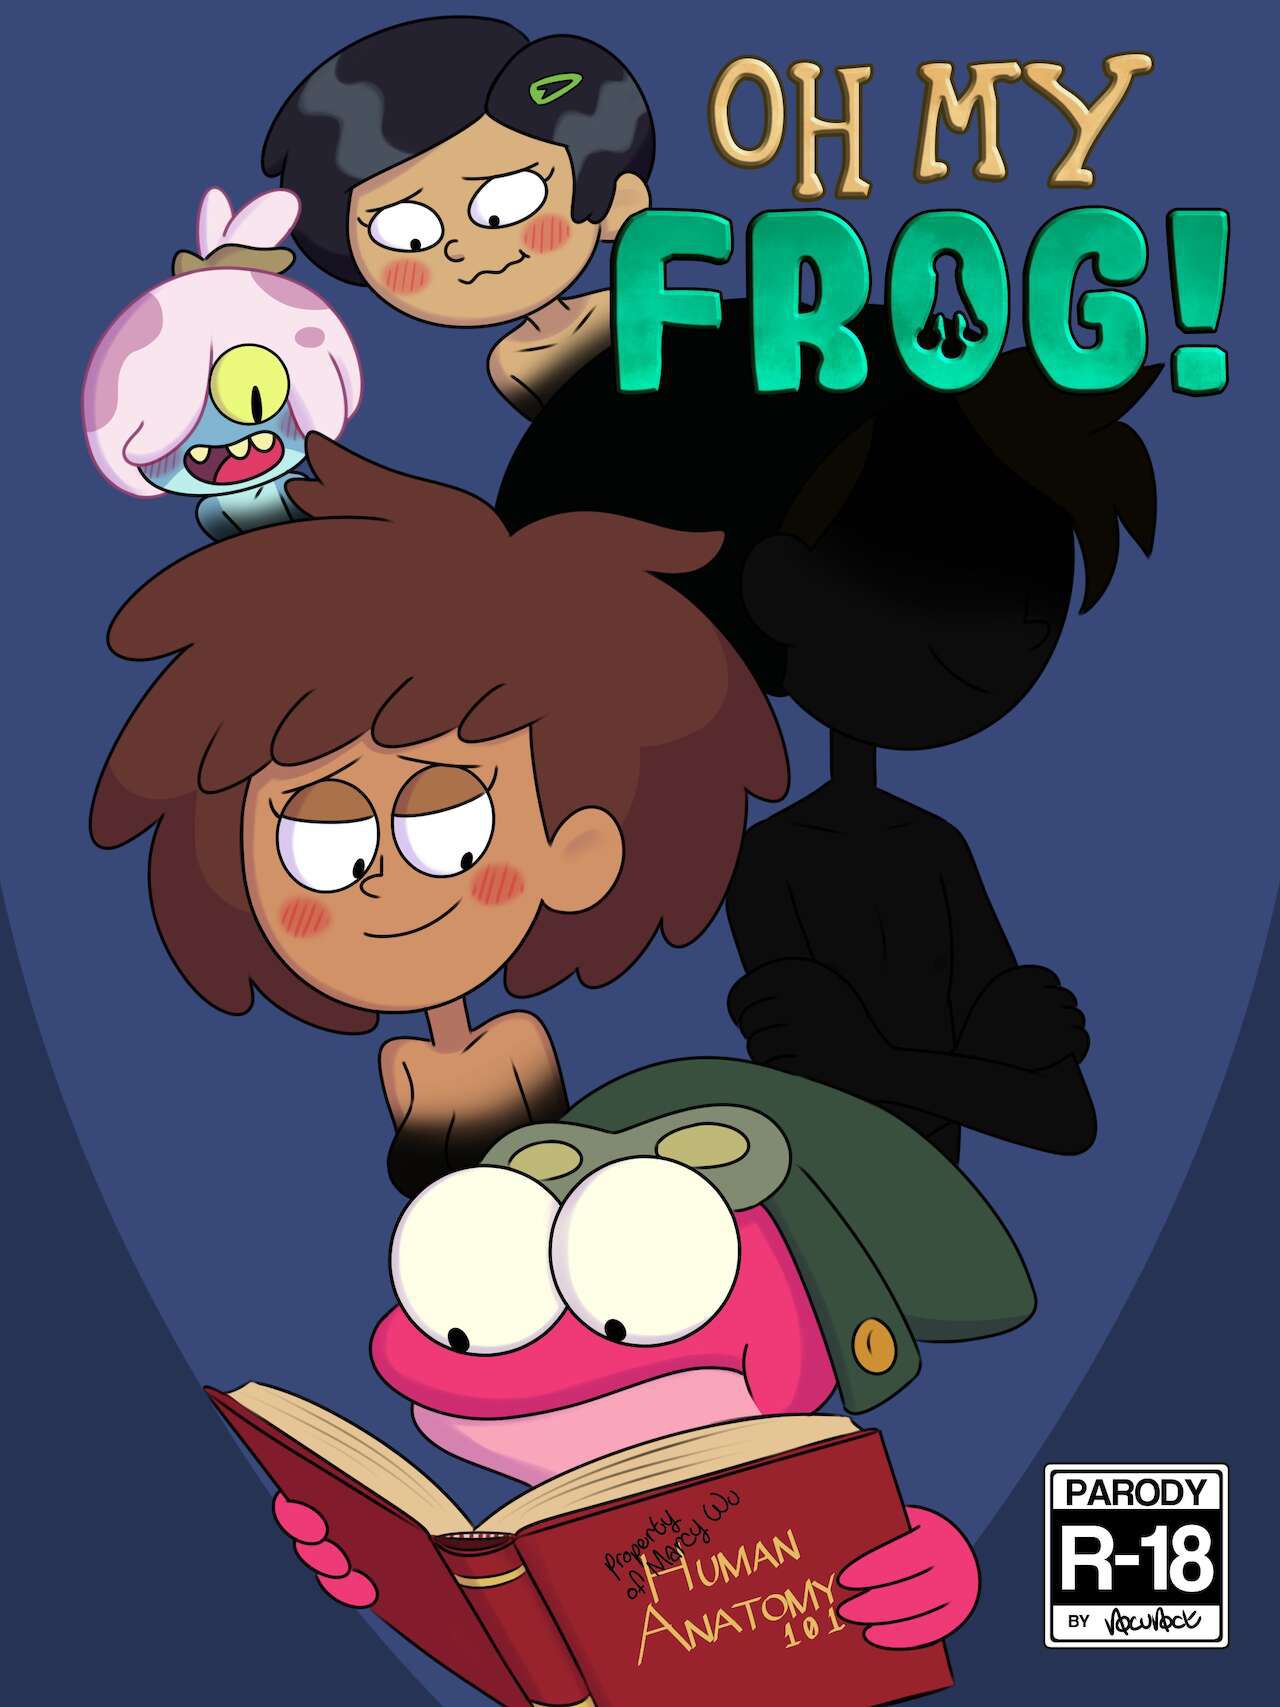 [Nocunoct] Oh My Frog! WIP 1